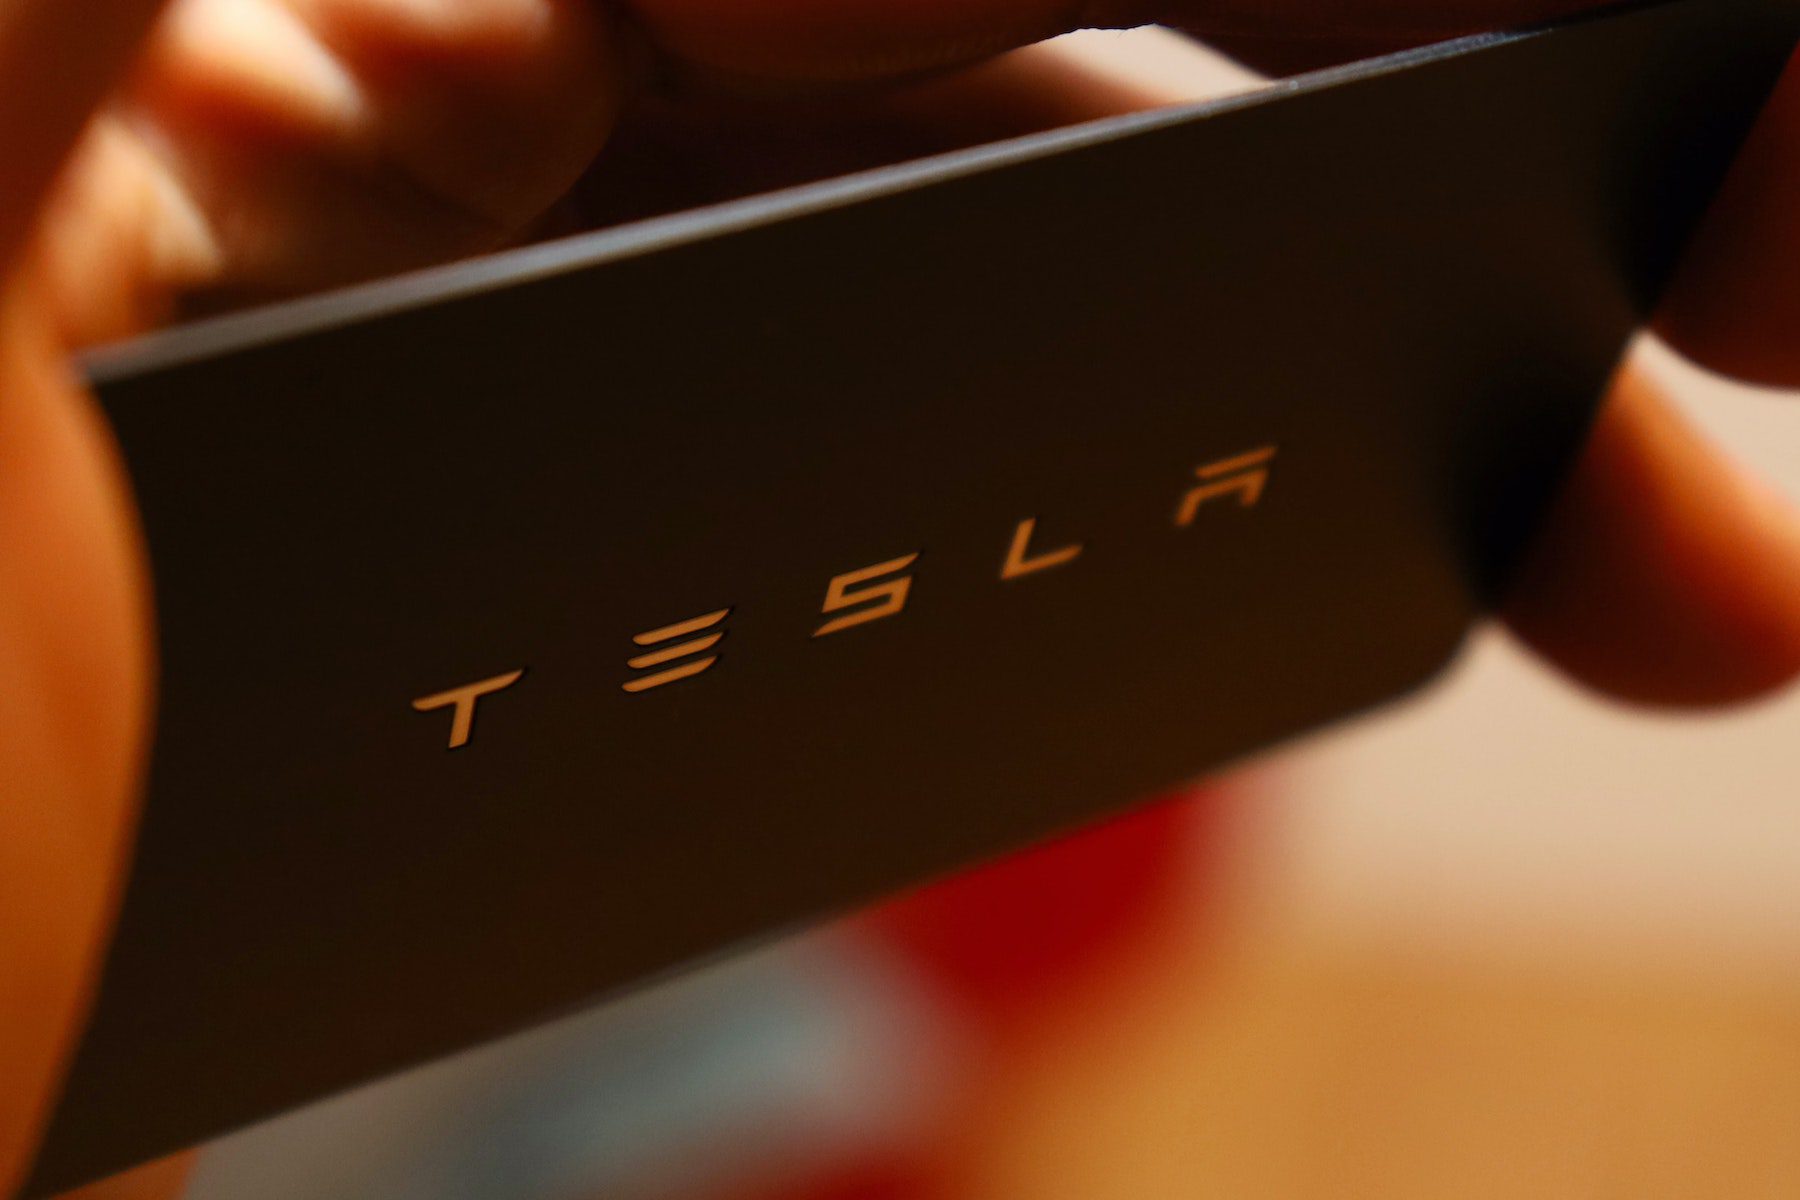 The Tesla logo embossed on a thin black card